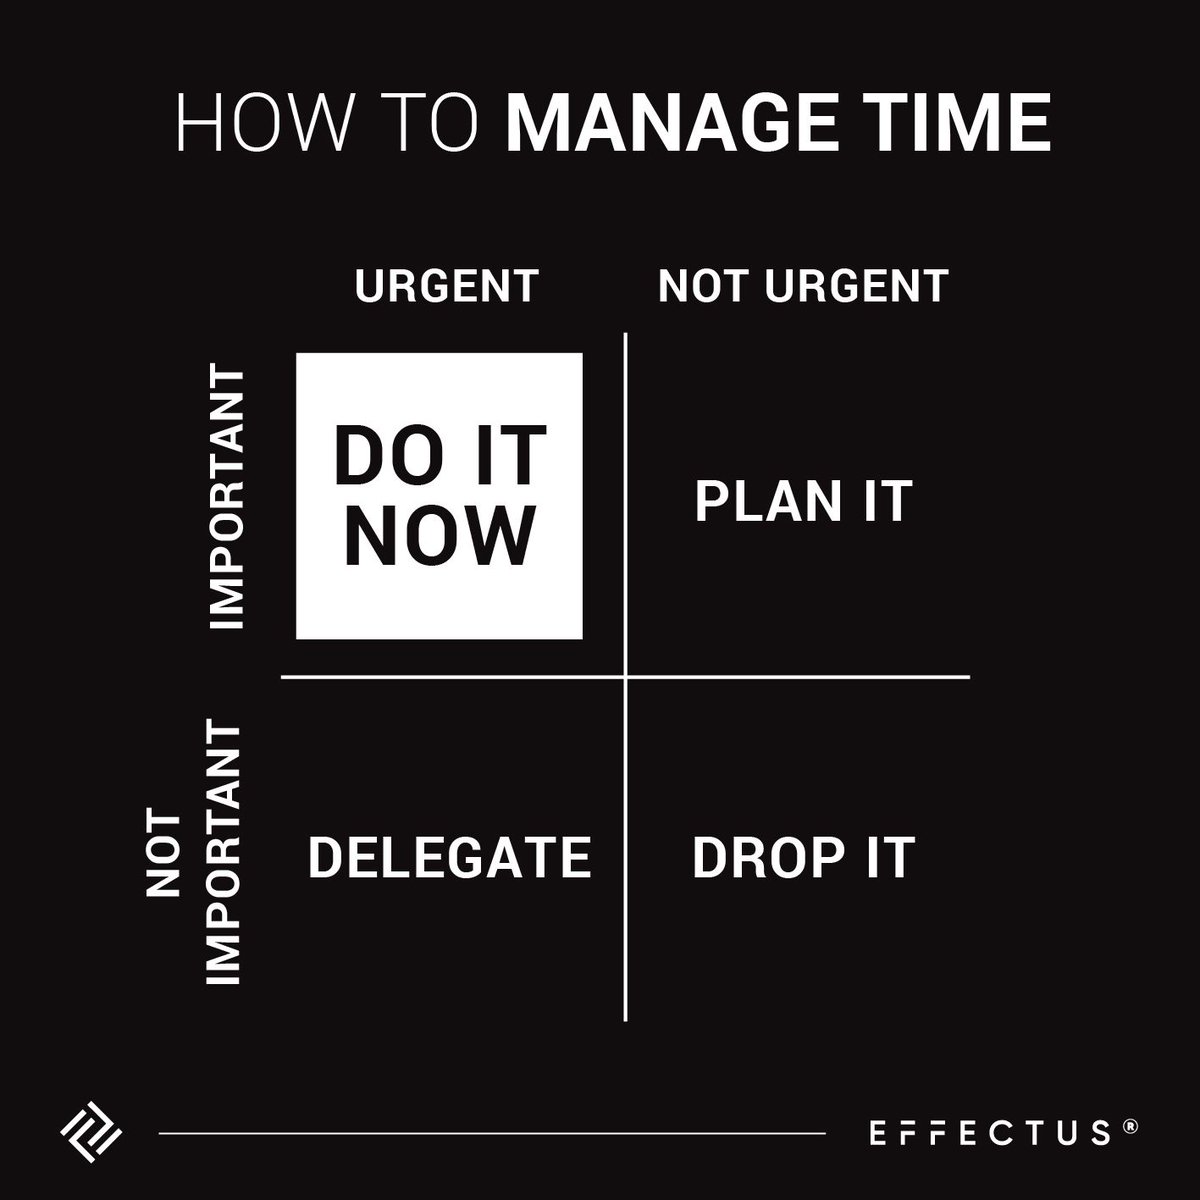 🕘📚 This is a pretty smart way to manage time! 📆 Do you have any other tips? 👇🏻 Share them below! . #effectus #effectussoftware #keeponcoding #codinginspiration #techtips #dataanalysis #scrum #reactjs #reactnative #webdeveloperslife #timemanagementtips #productivitytips